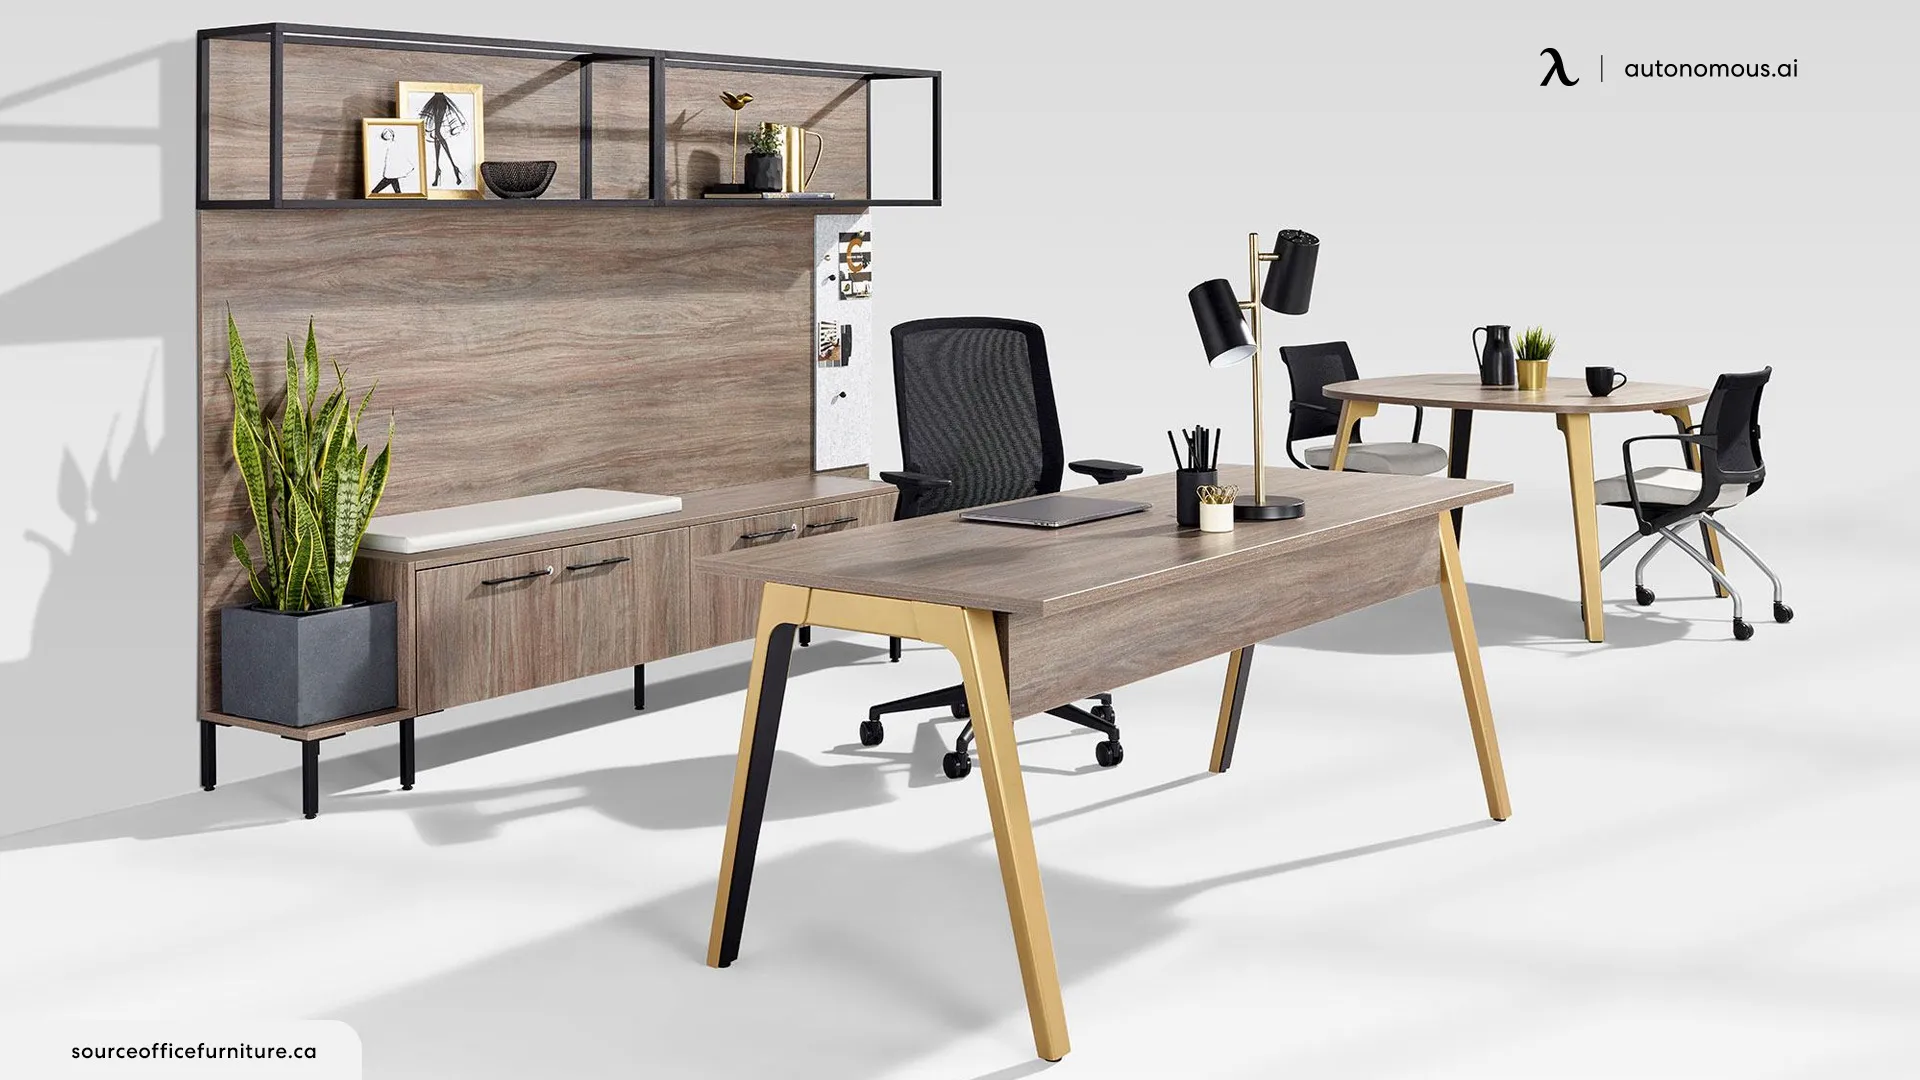 Source Office Furniture